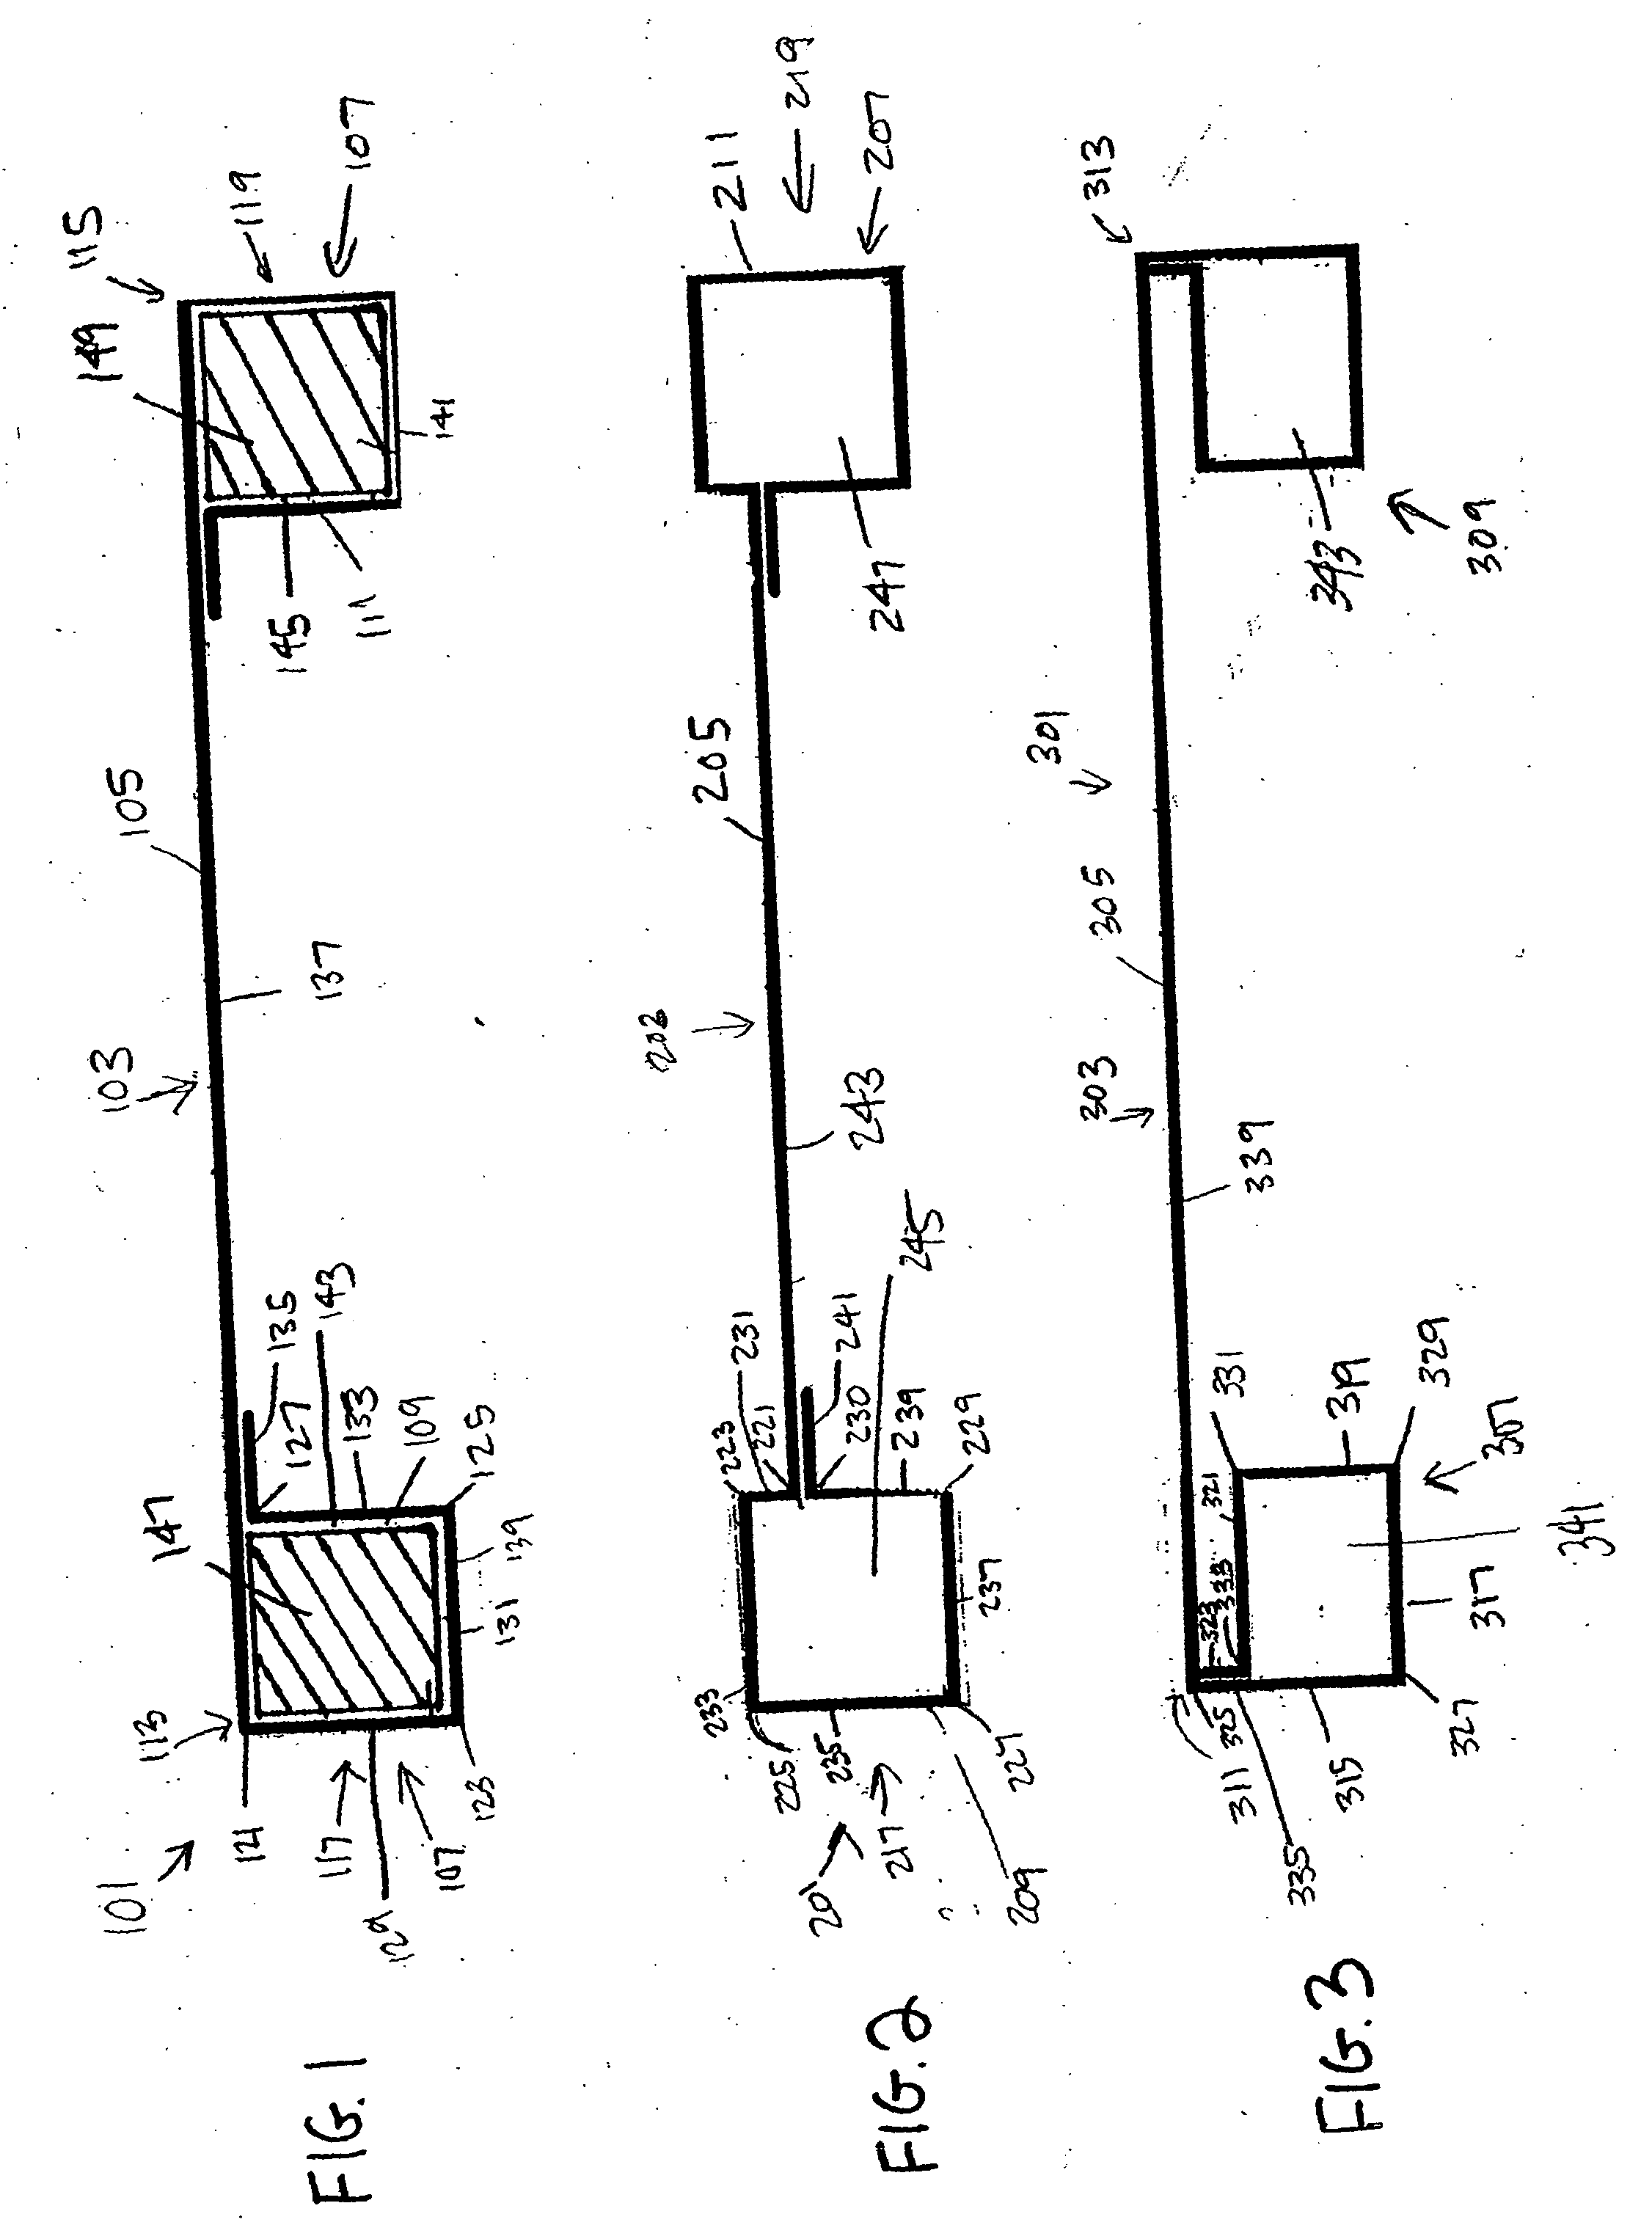 Collapsible pallet system and methods